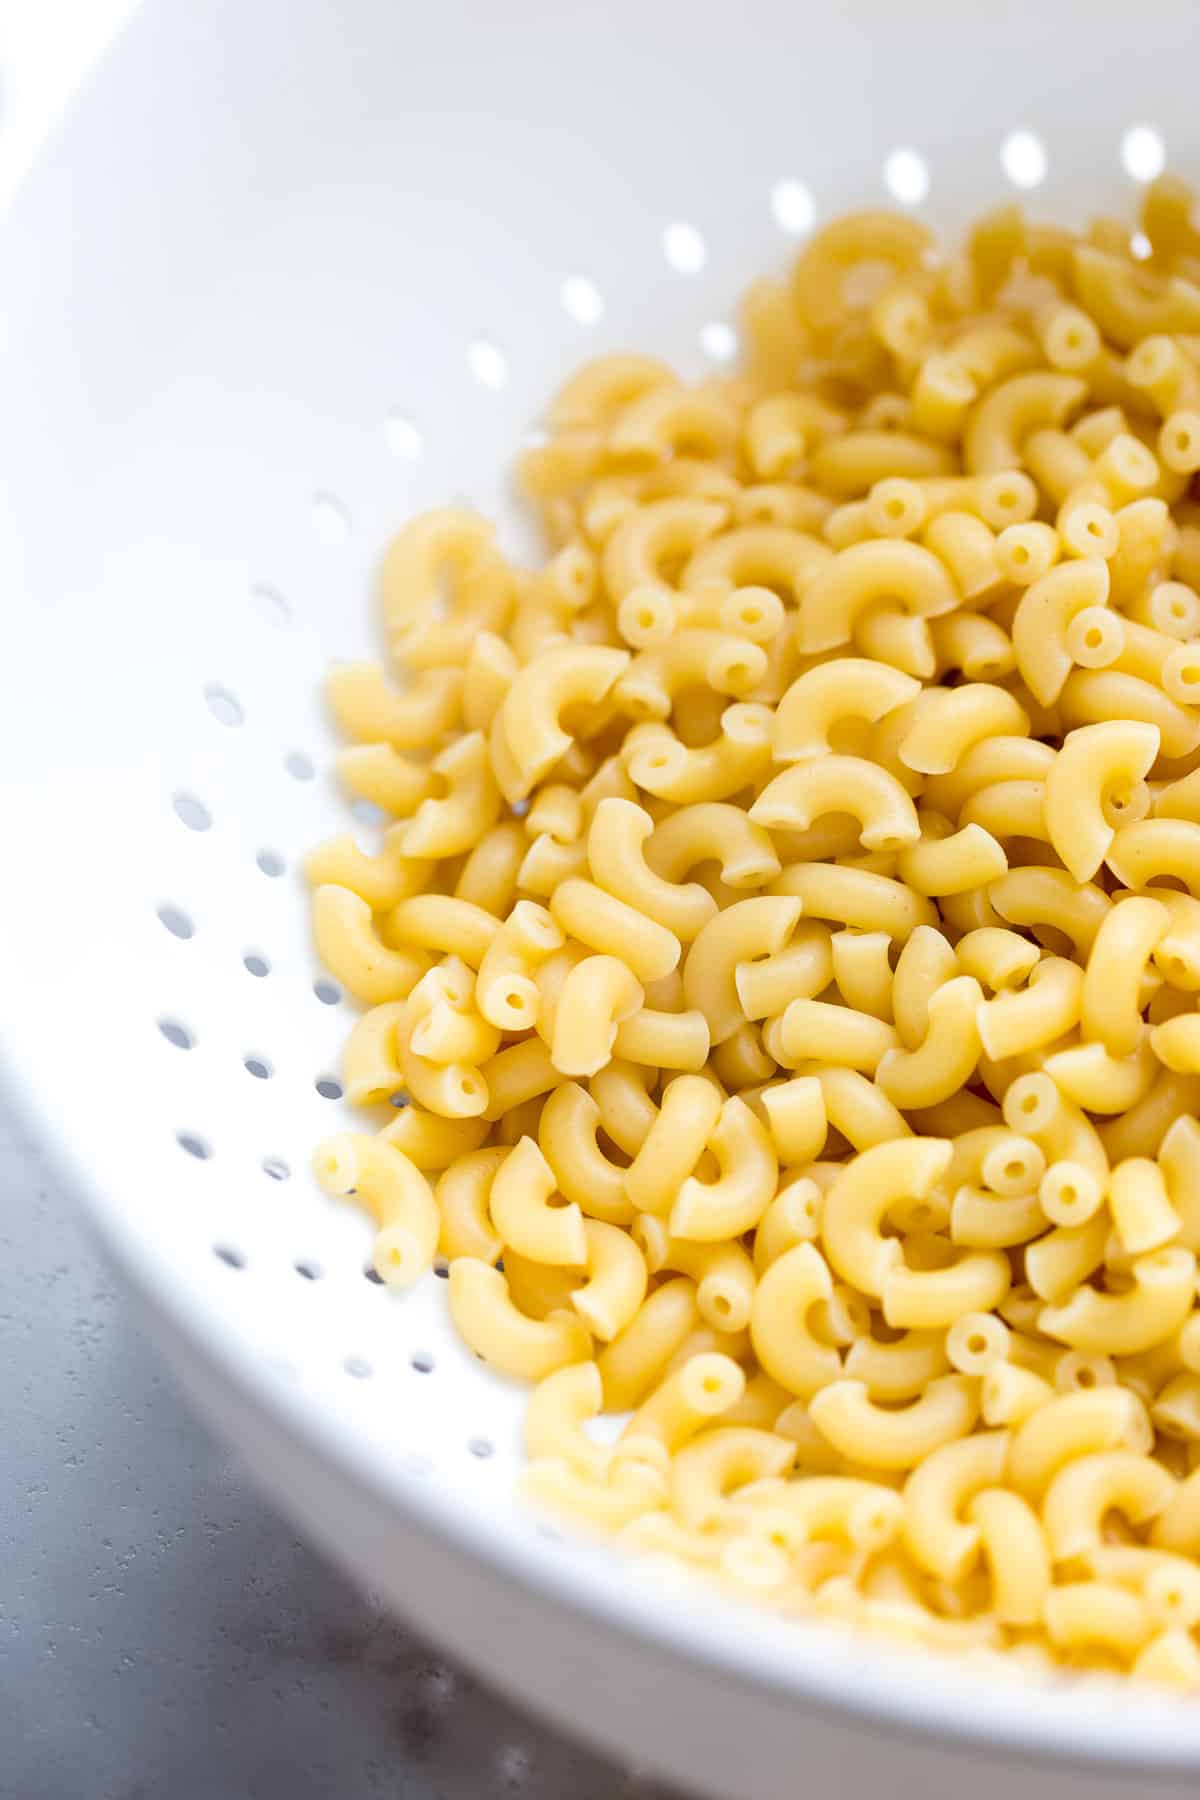 Cooked macaroni noodles in a strainer.